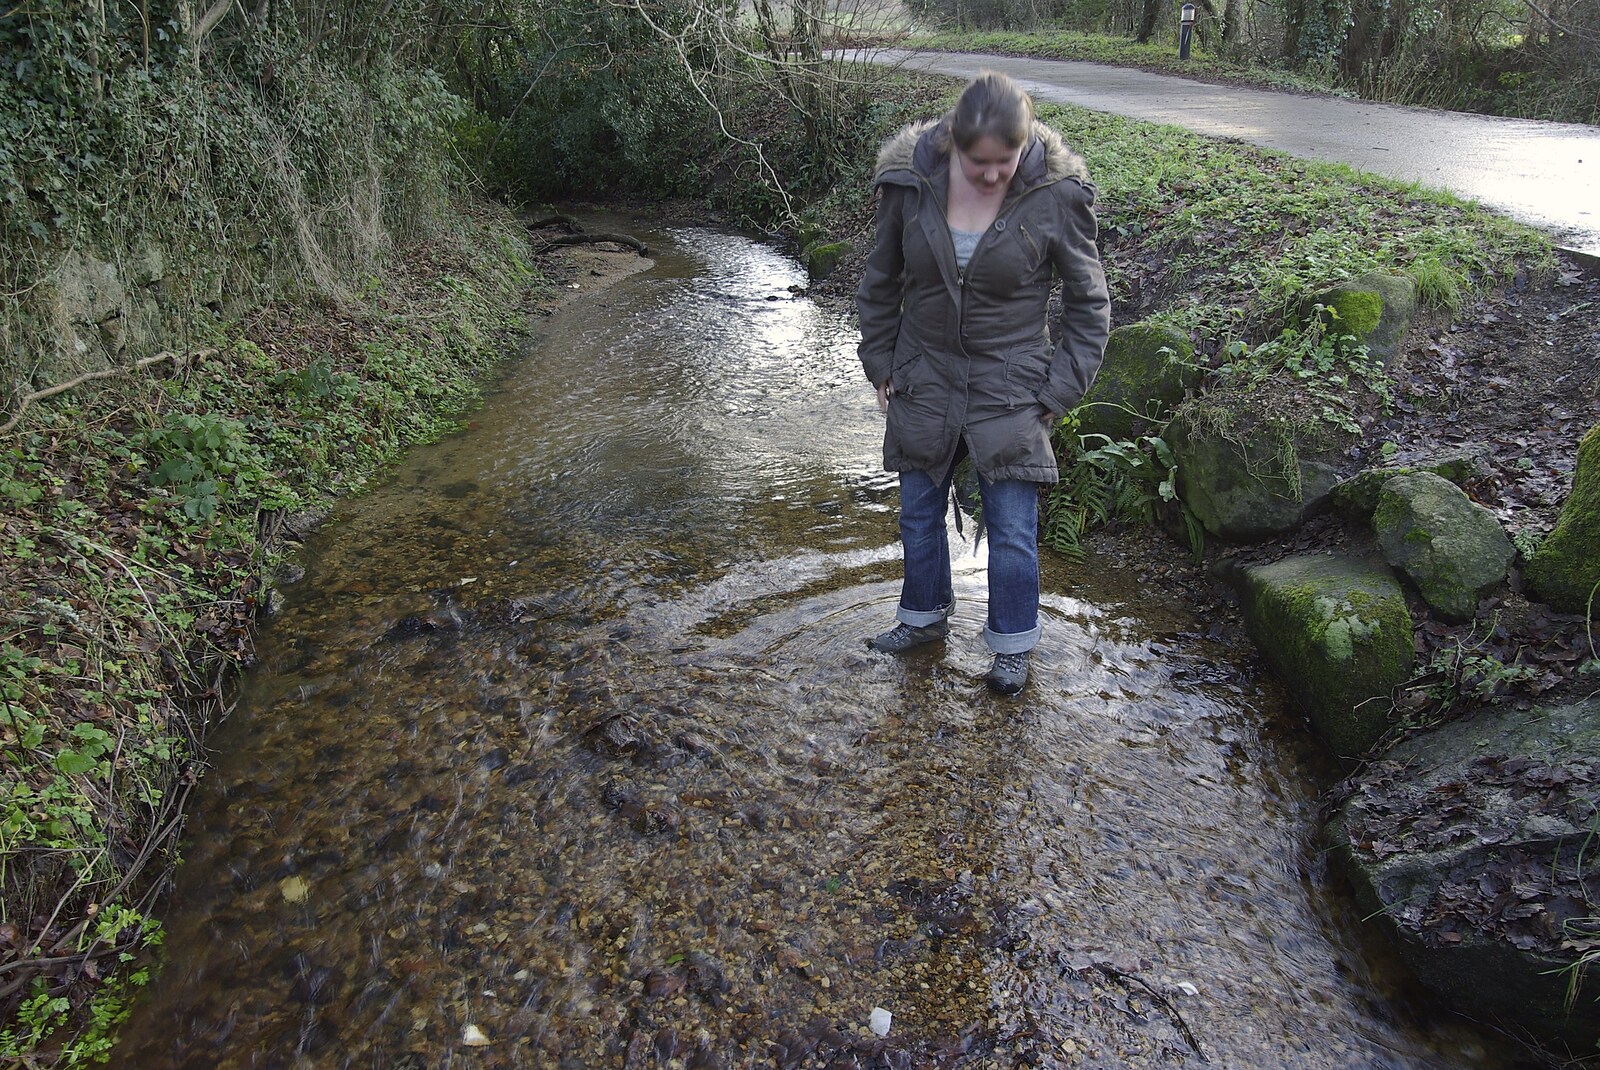 Isobel washes her new boots in the stream from Matt's Allotment and Meldon Hill, Chagford, Devon - 26th December 2007